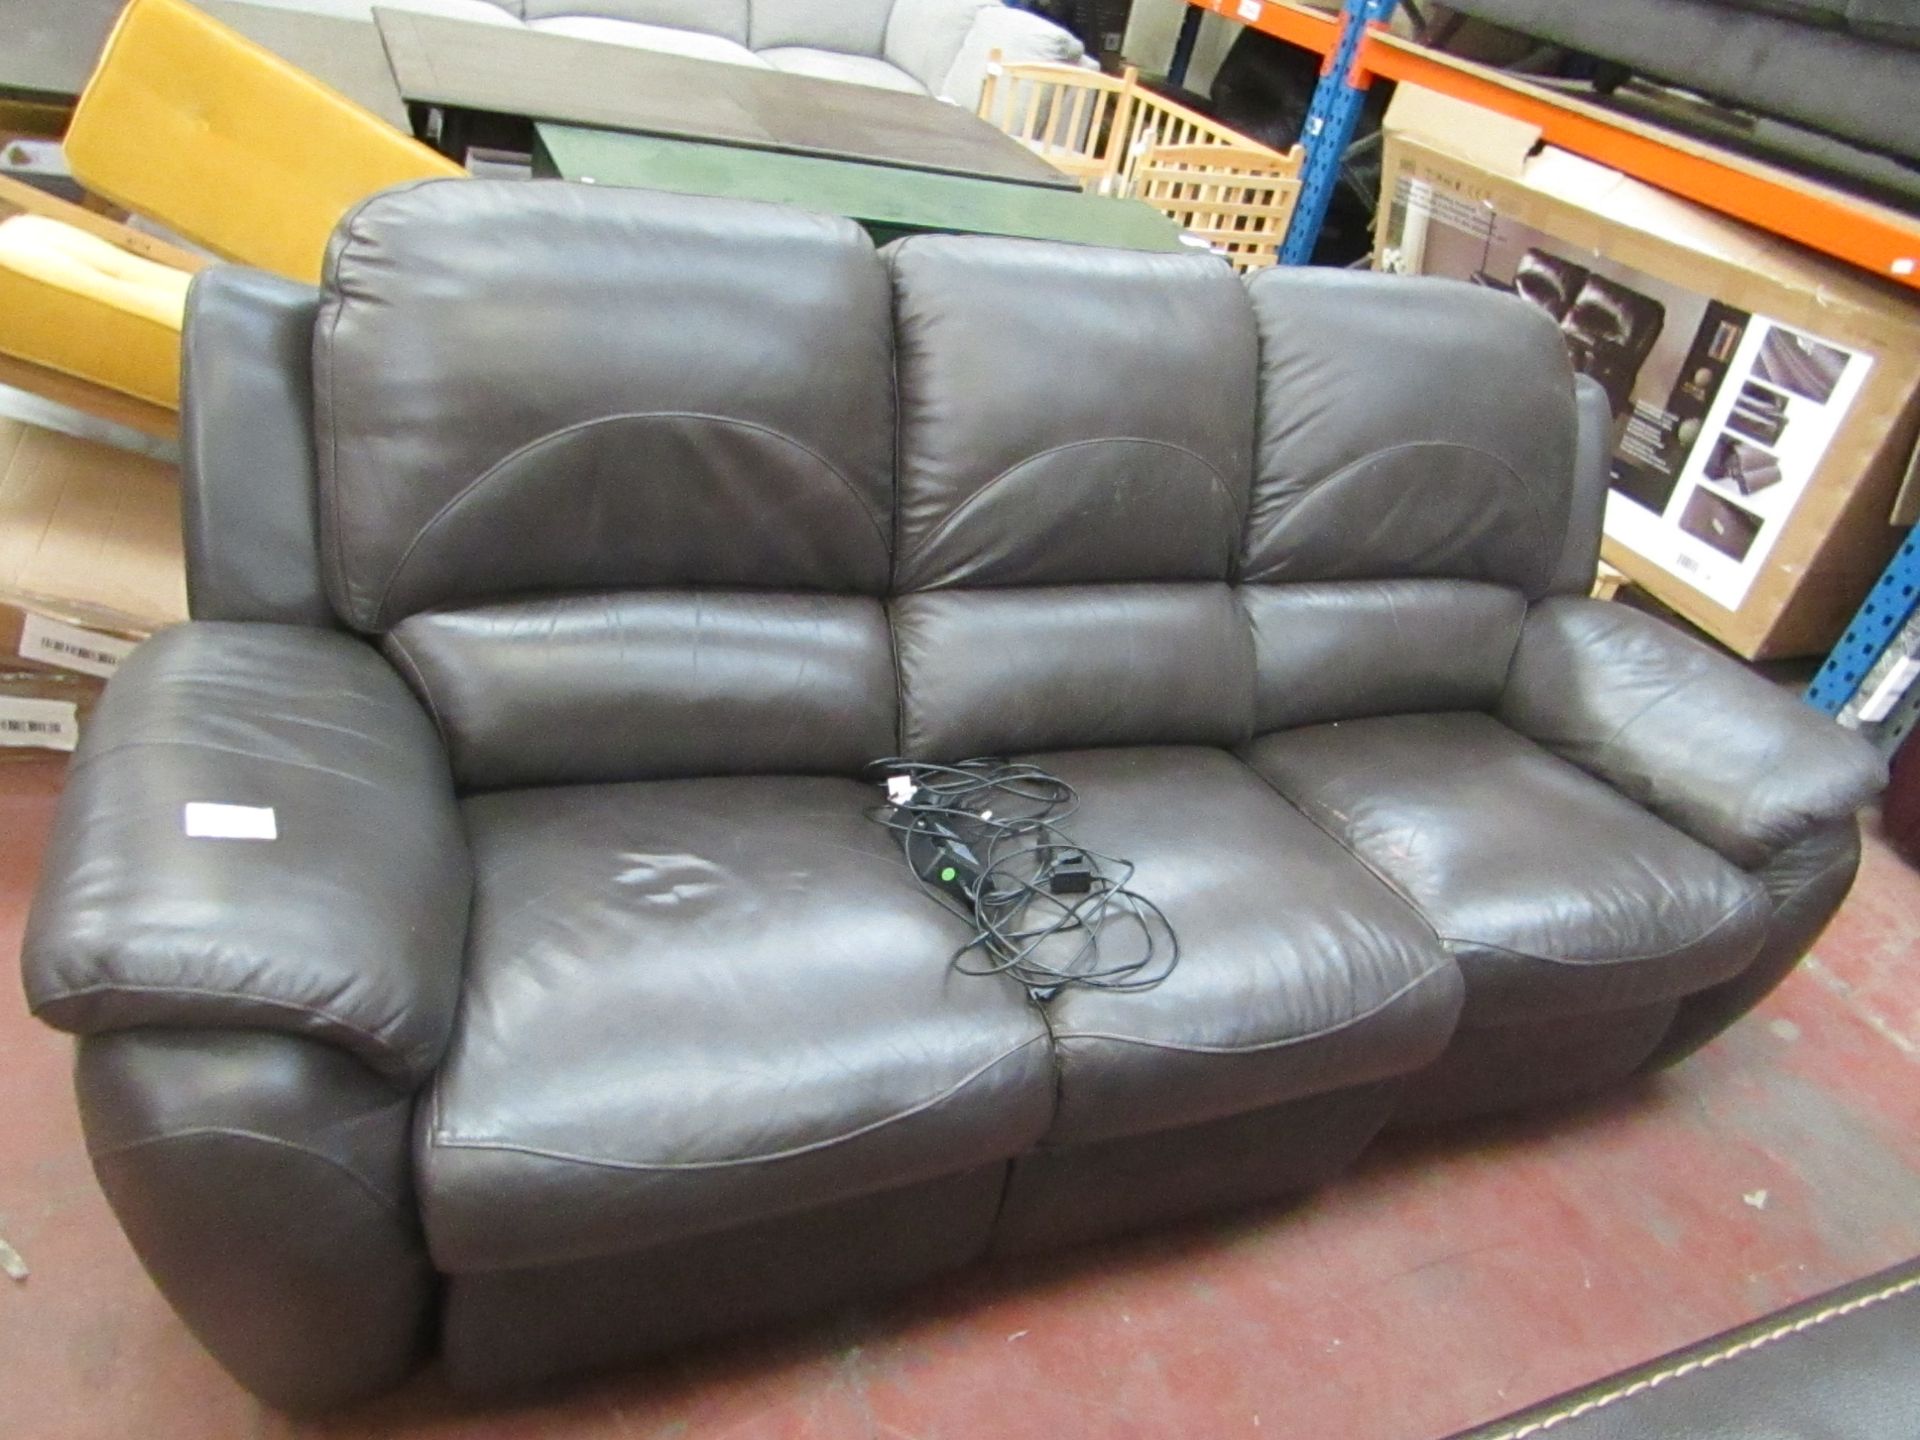 La Z Boy 3 seater electric reclining sofa, tested working one of the seats has discoloration on it